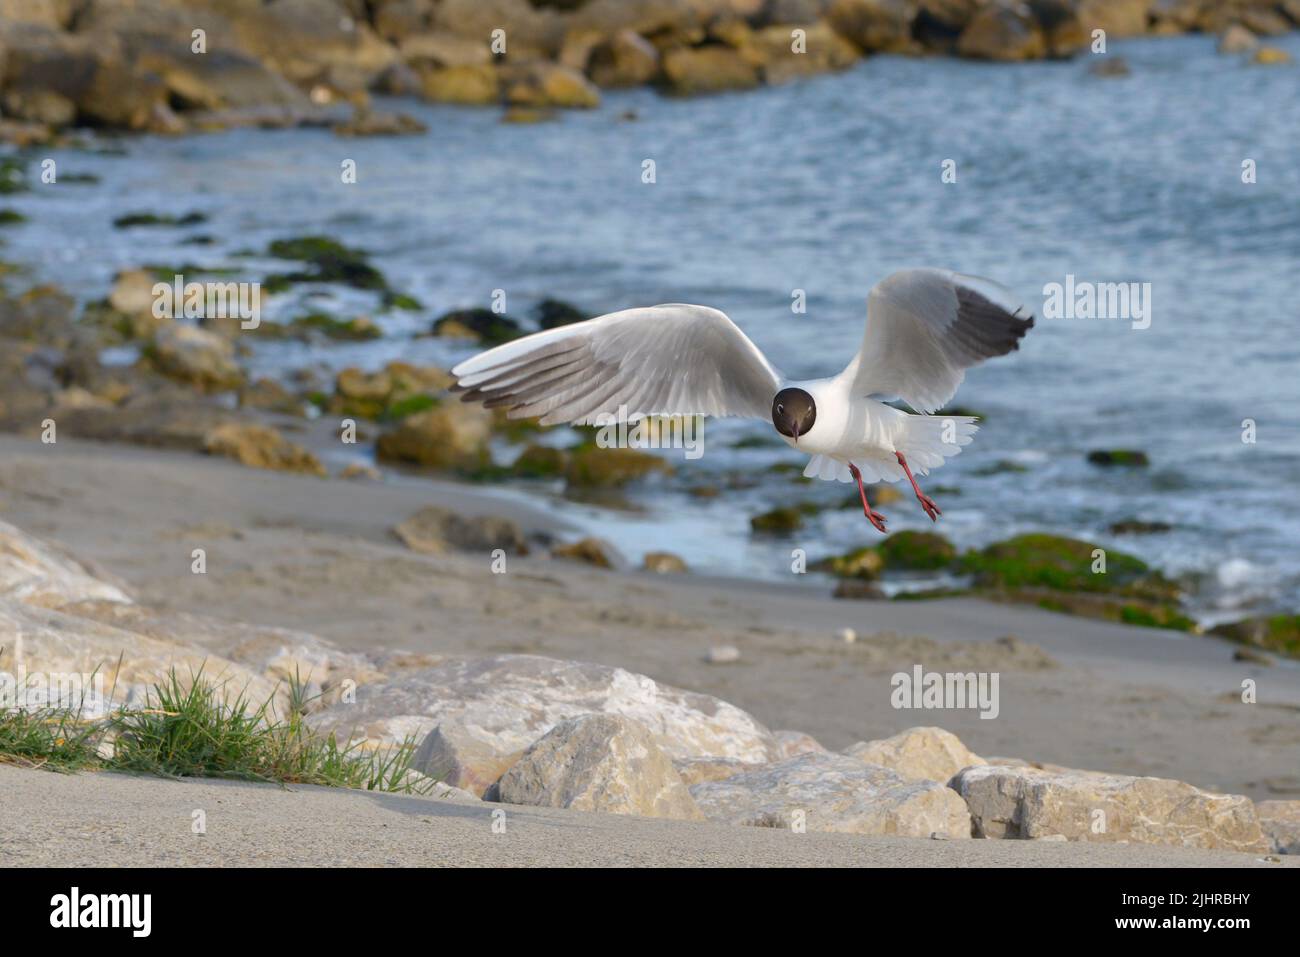 Black-headed Gulls (Chroicocephalus ridibundus) in flight seen from front, in the Camargue, a natural region located south of Arles in France Stock Photo